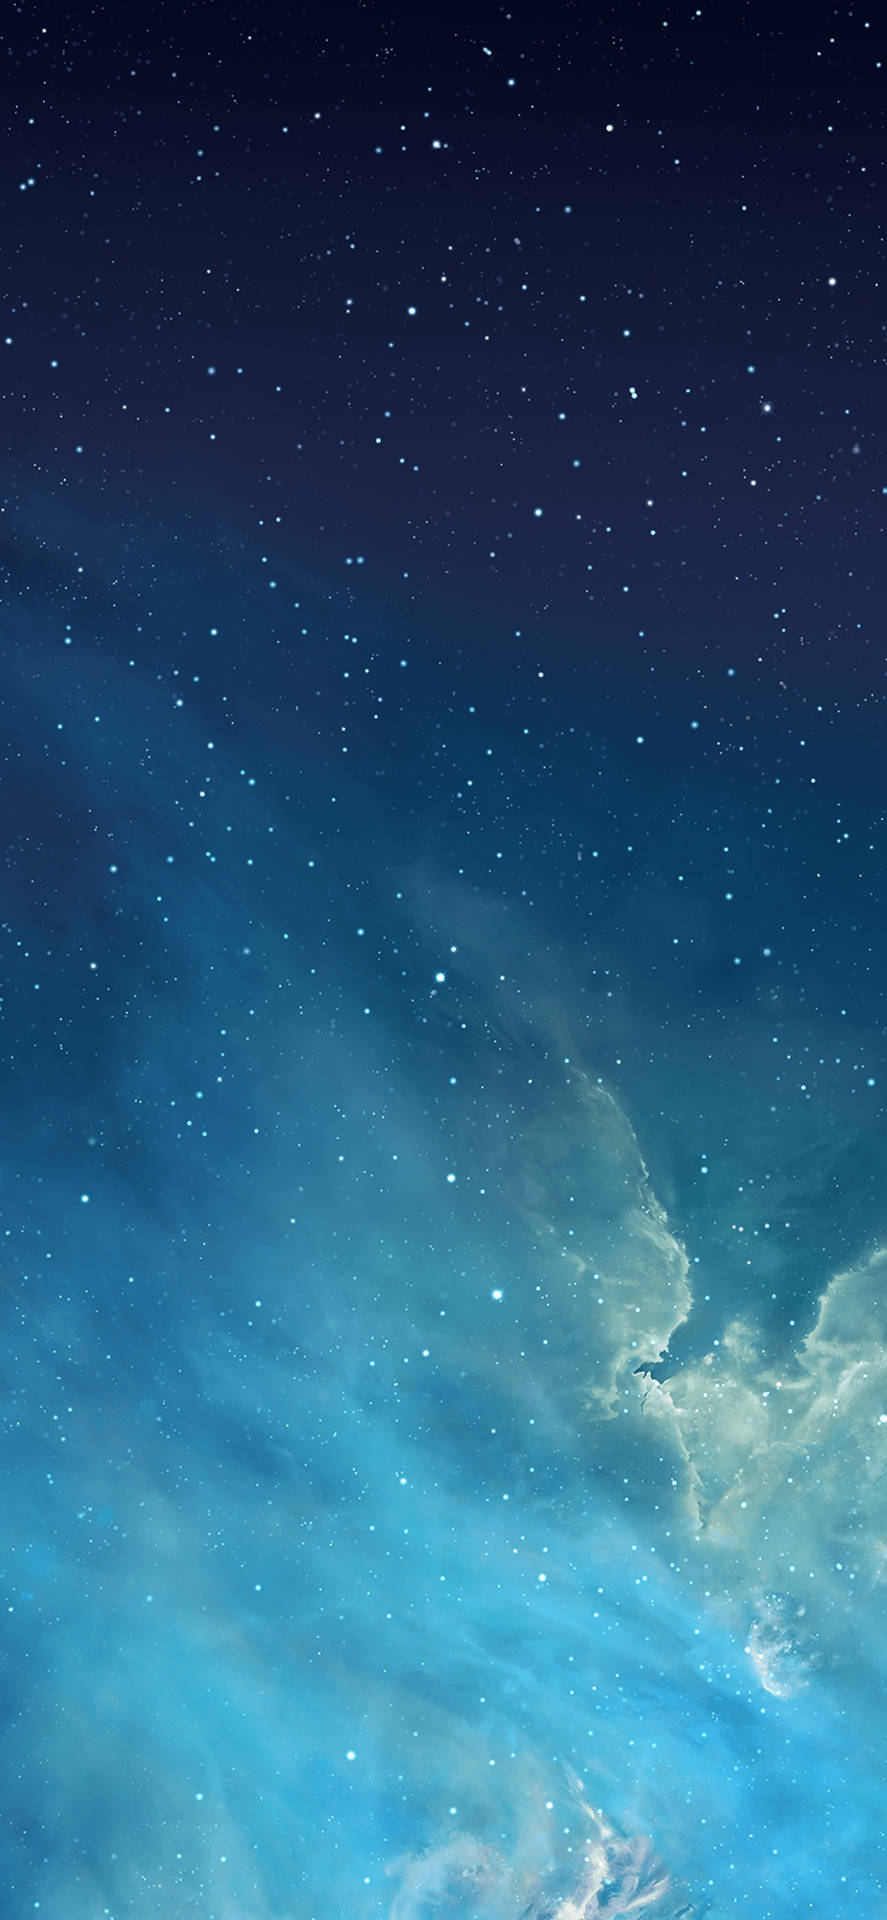 Refreshing blue sky, bright stars, and the iconic Apple logo Wallpaper